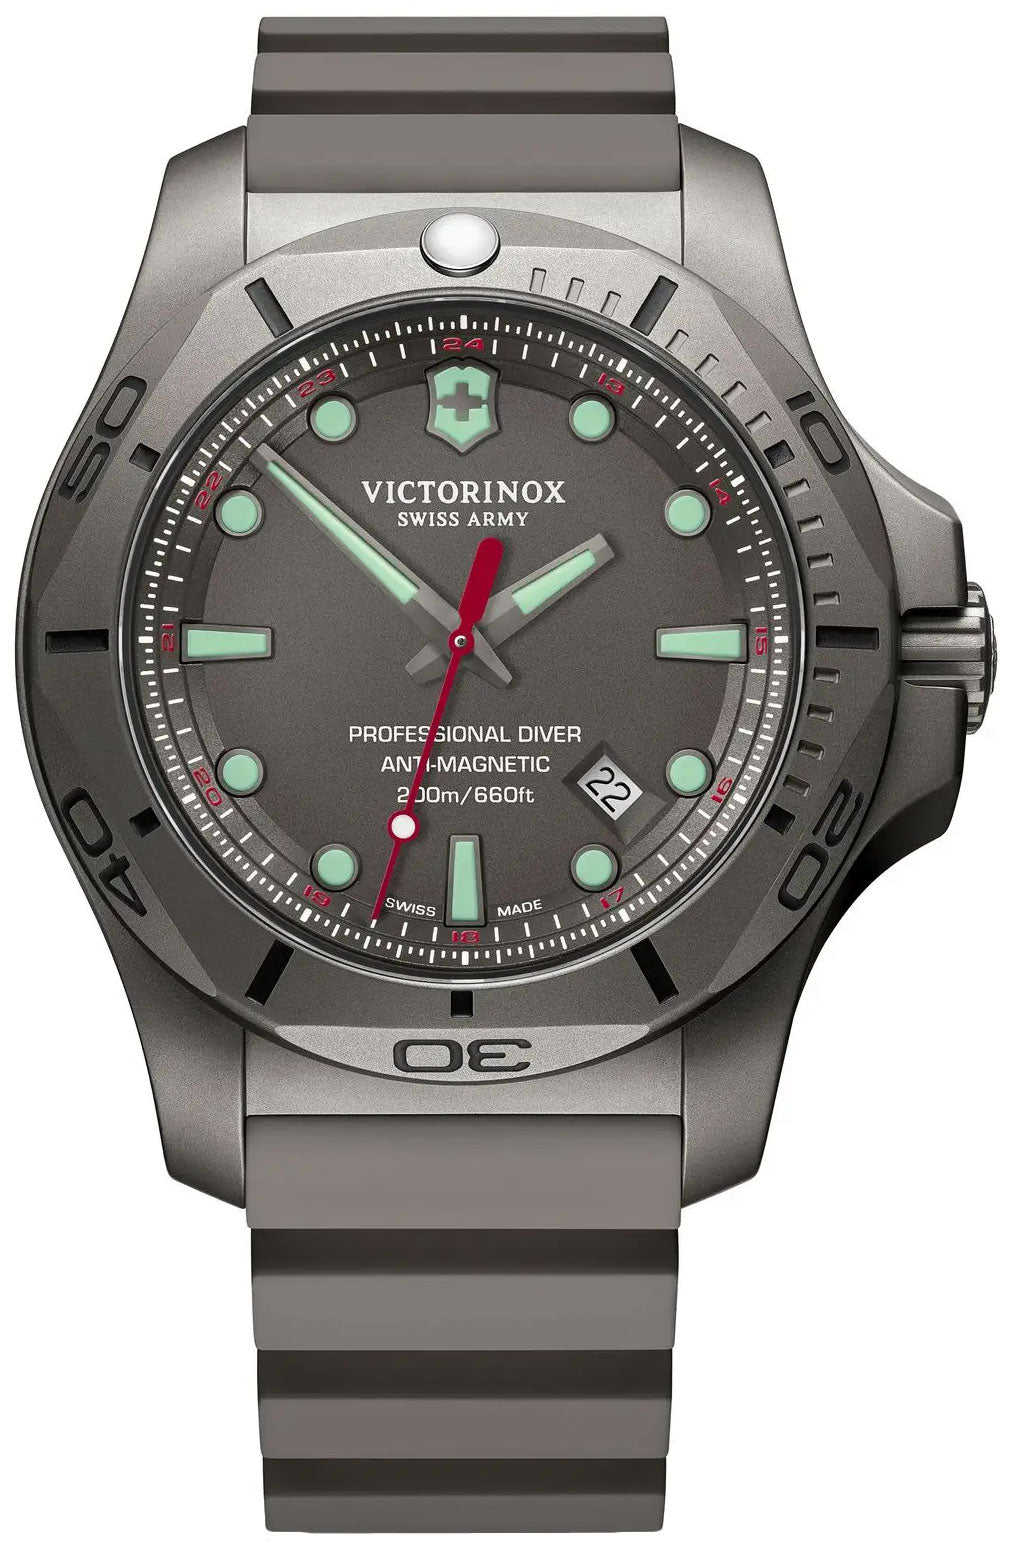 update alt-text with template Watches - Mens-Victorinox Swiss Army-241810-40 - 45 mm, 45 - 50 mm, date, divers, gray, I.N.O.X., mens, menswatches, new arrivals, round, rpSKU_241695, rpSKU_241798, rpSKU_241816, rpSKU_241817, rpSKU_241818, rubber, swiss quartz, titanium case, uni-directional rotating, Victorinox Swiss Army, watches-Watches & Beyond